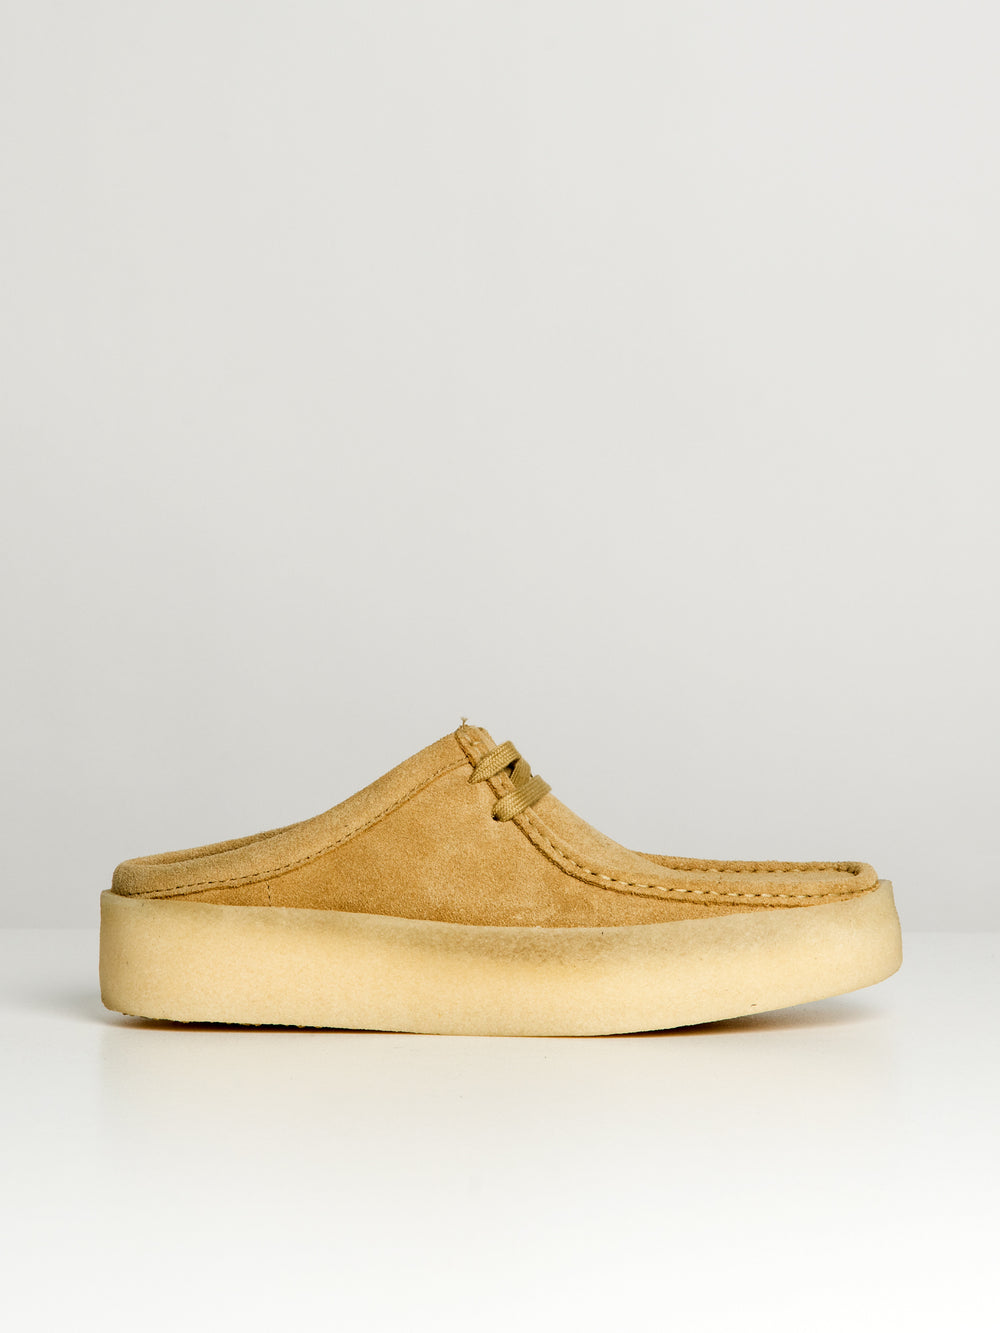 MENS CLARKS WALLABEE CUP LO - CLEARANCE